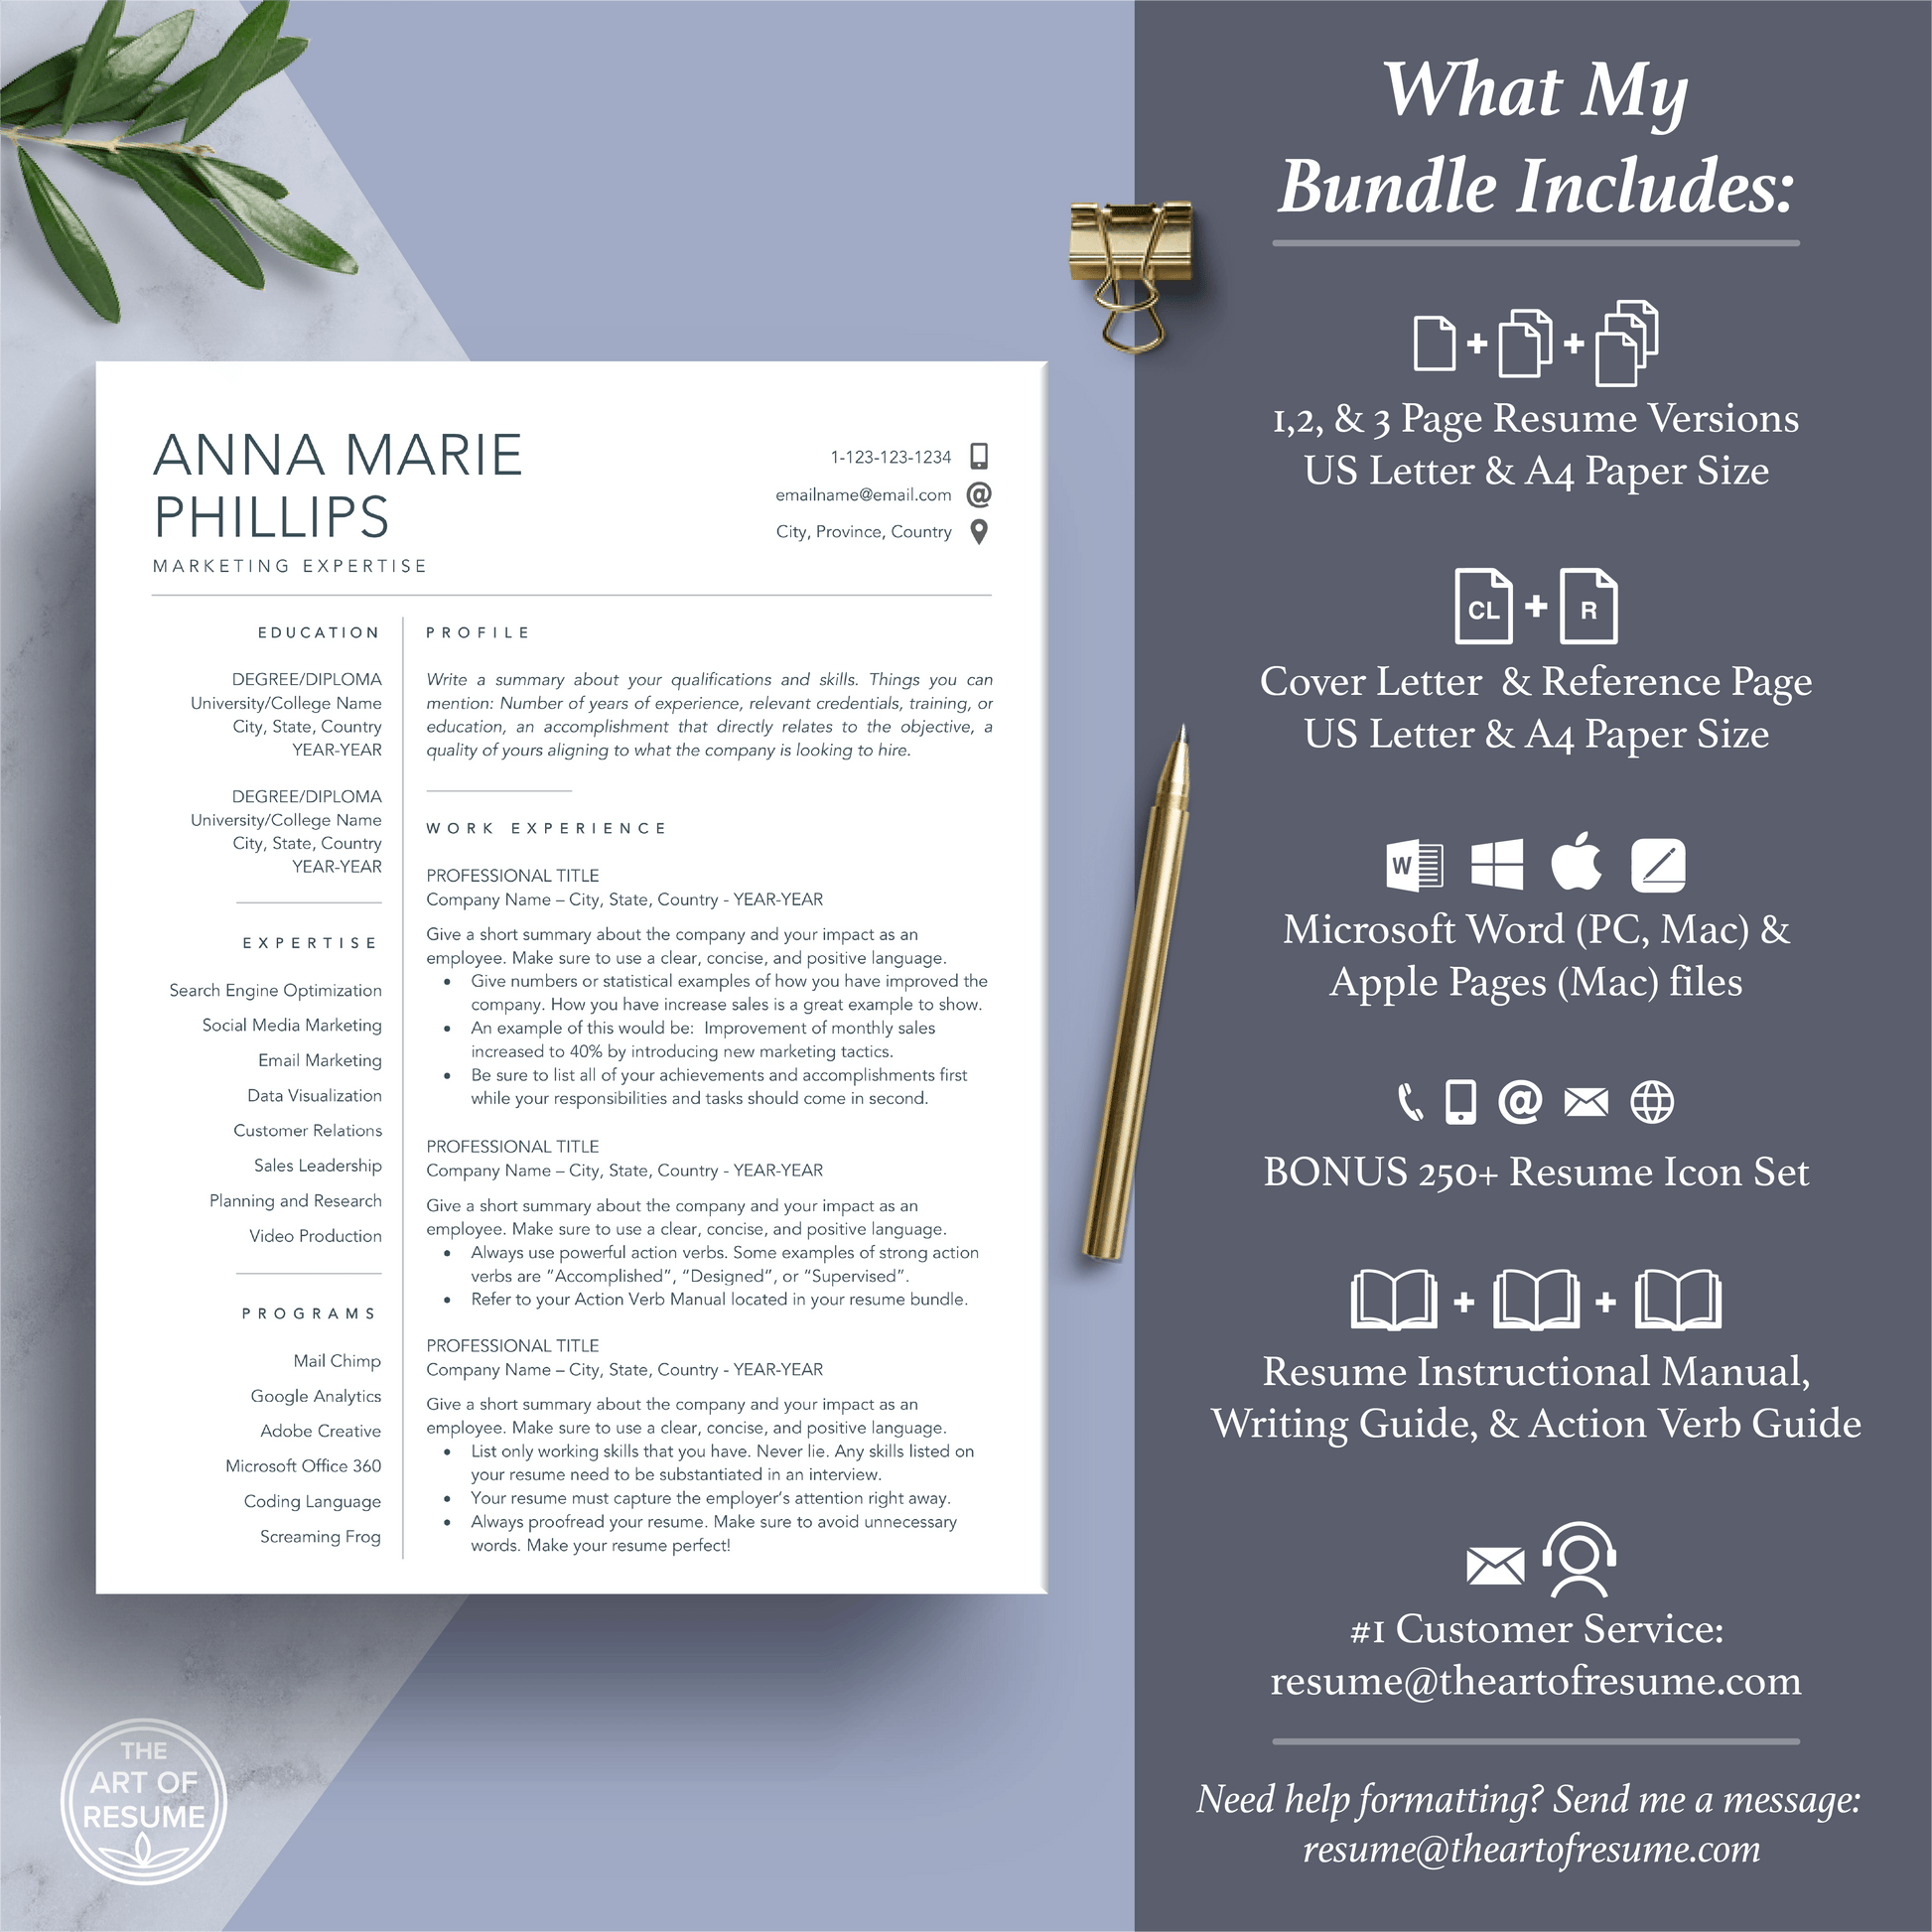 The Art of Resume Templates | Professional Simple Clean Minimalist  Resume CV Template Maker 3, Cover Letter, Reference Page, Mac, PC, A4 Paper, US size, Free Guide, The Art of Resume Writing, 250 Bonus Resume Icons